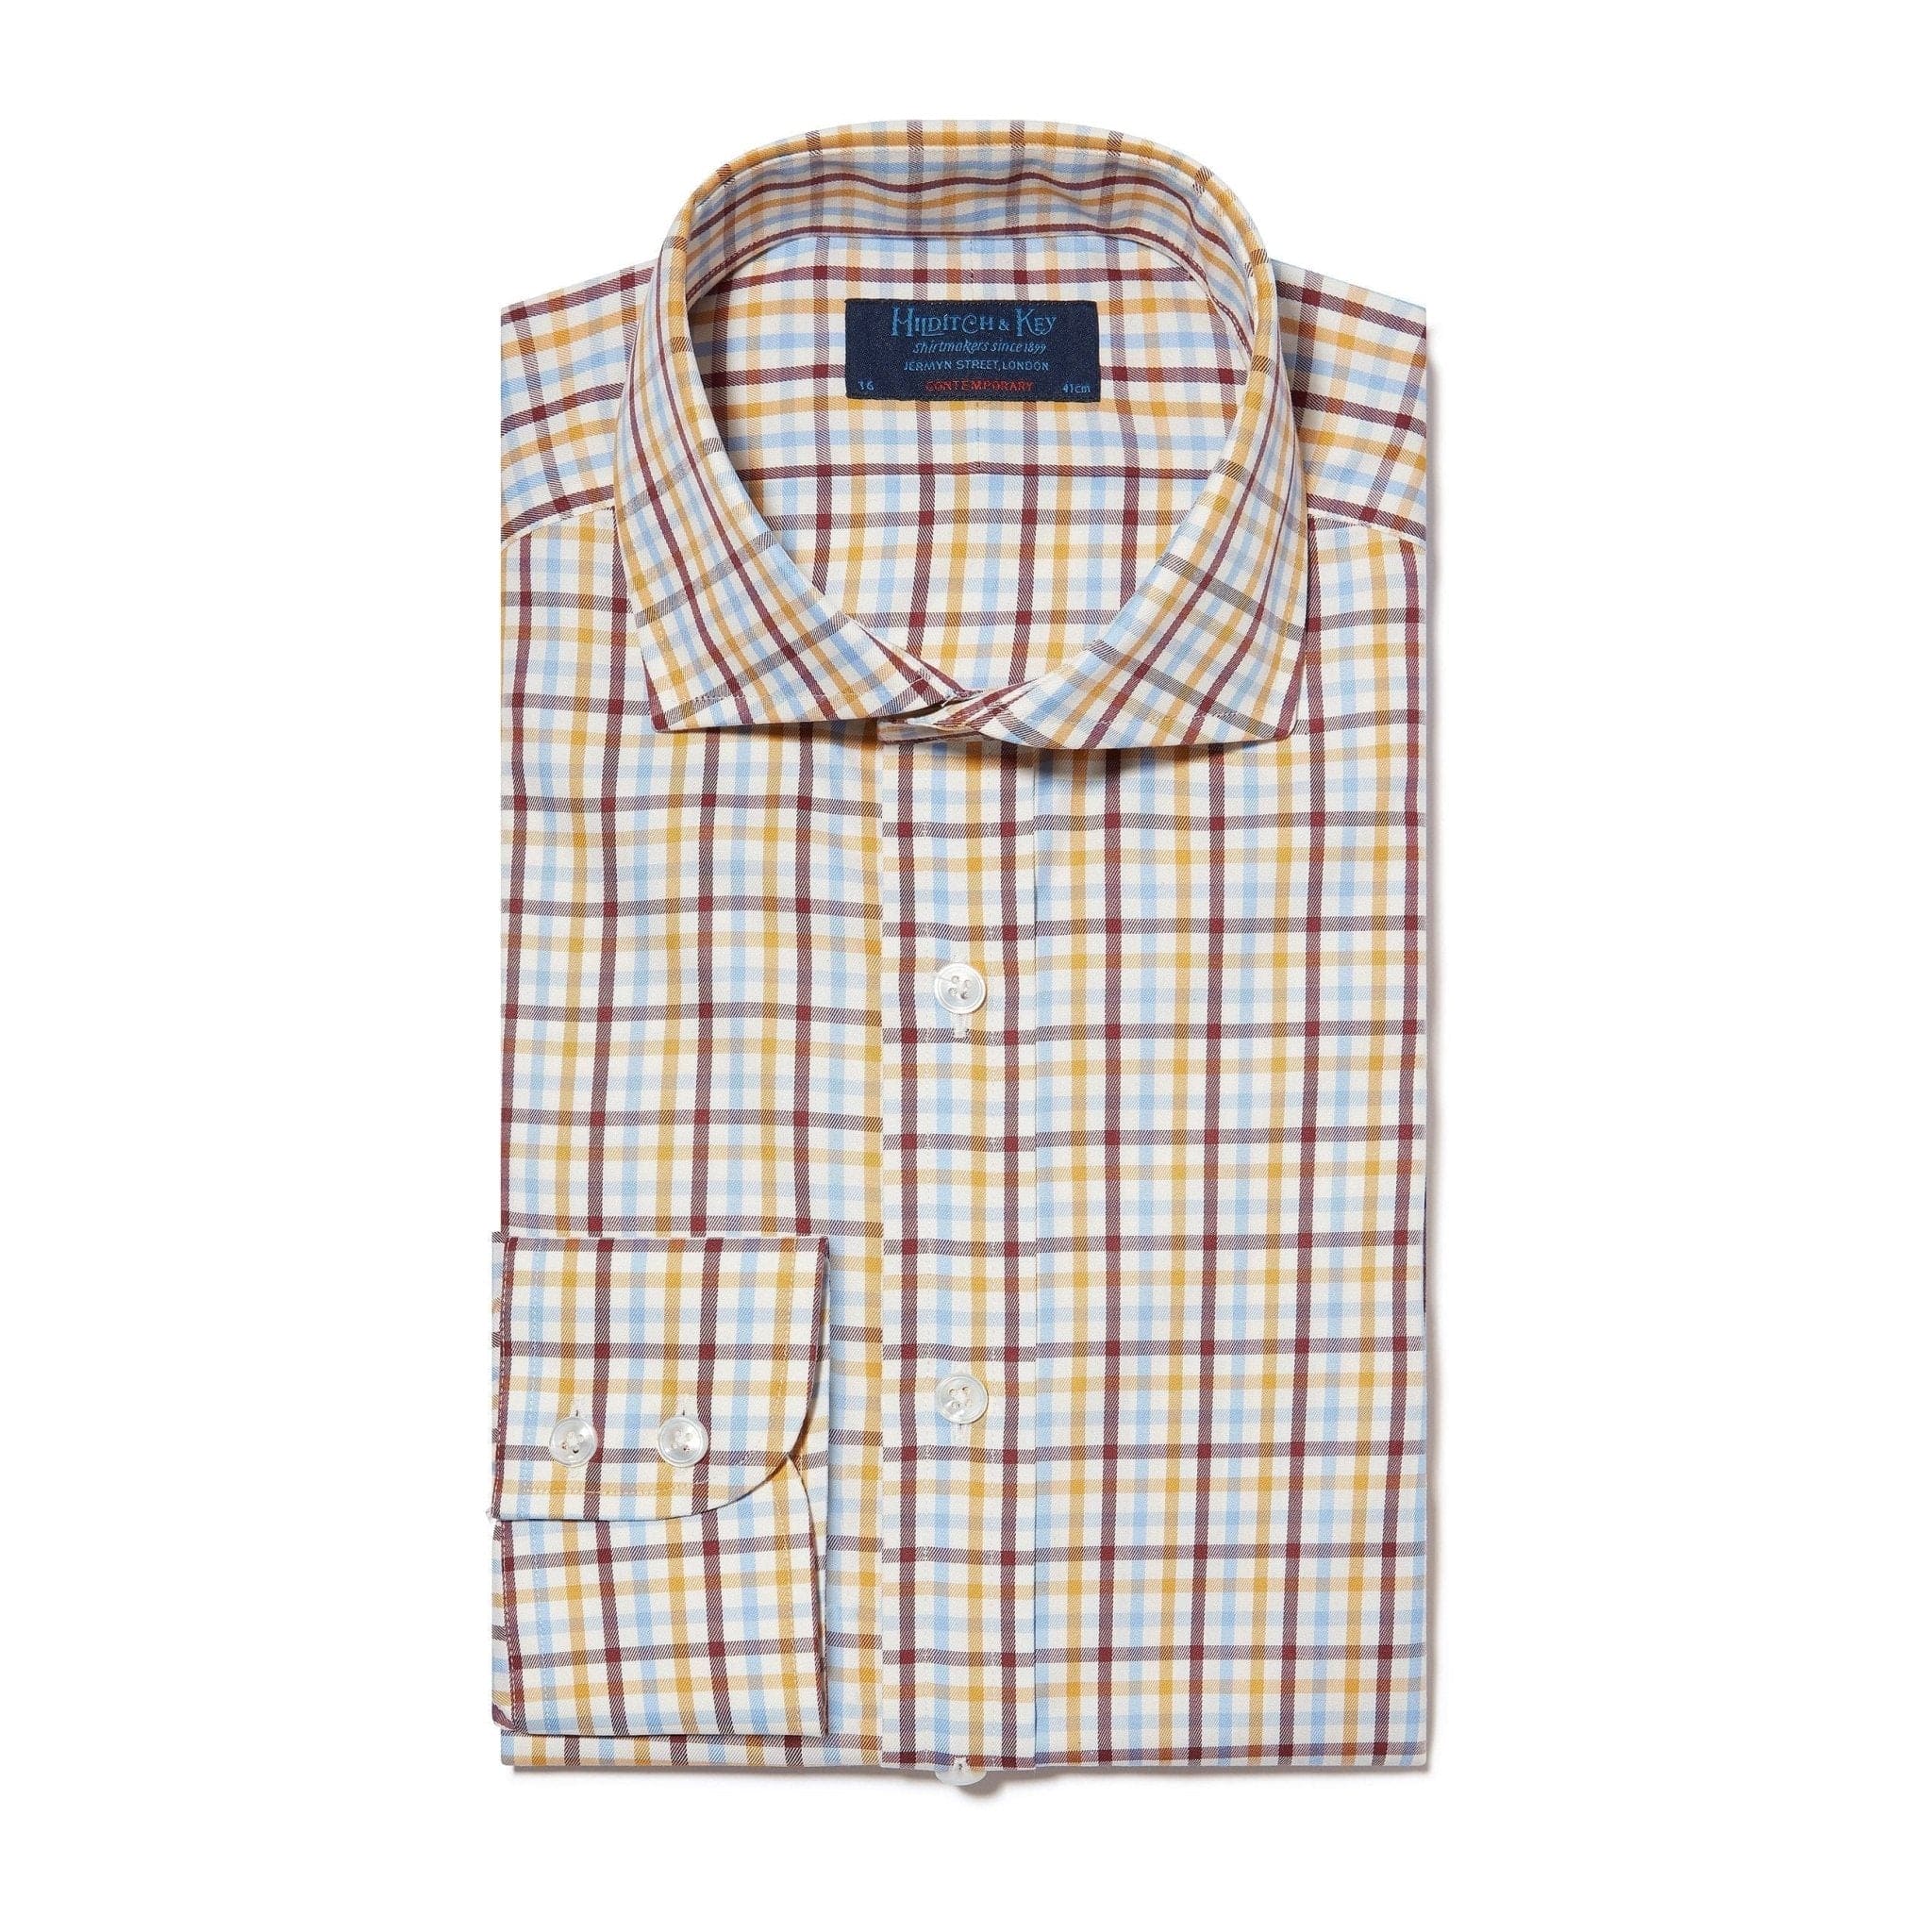 Contemporary Fit, Cut-away Collar, 2 Button Cuff Shirt in a Cream, Burgundy, Yellow & Blue Check Brushed Cotton